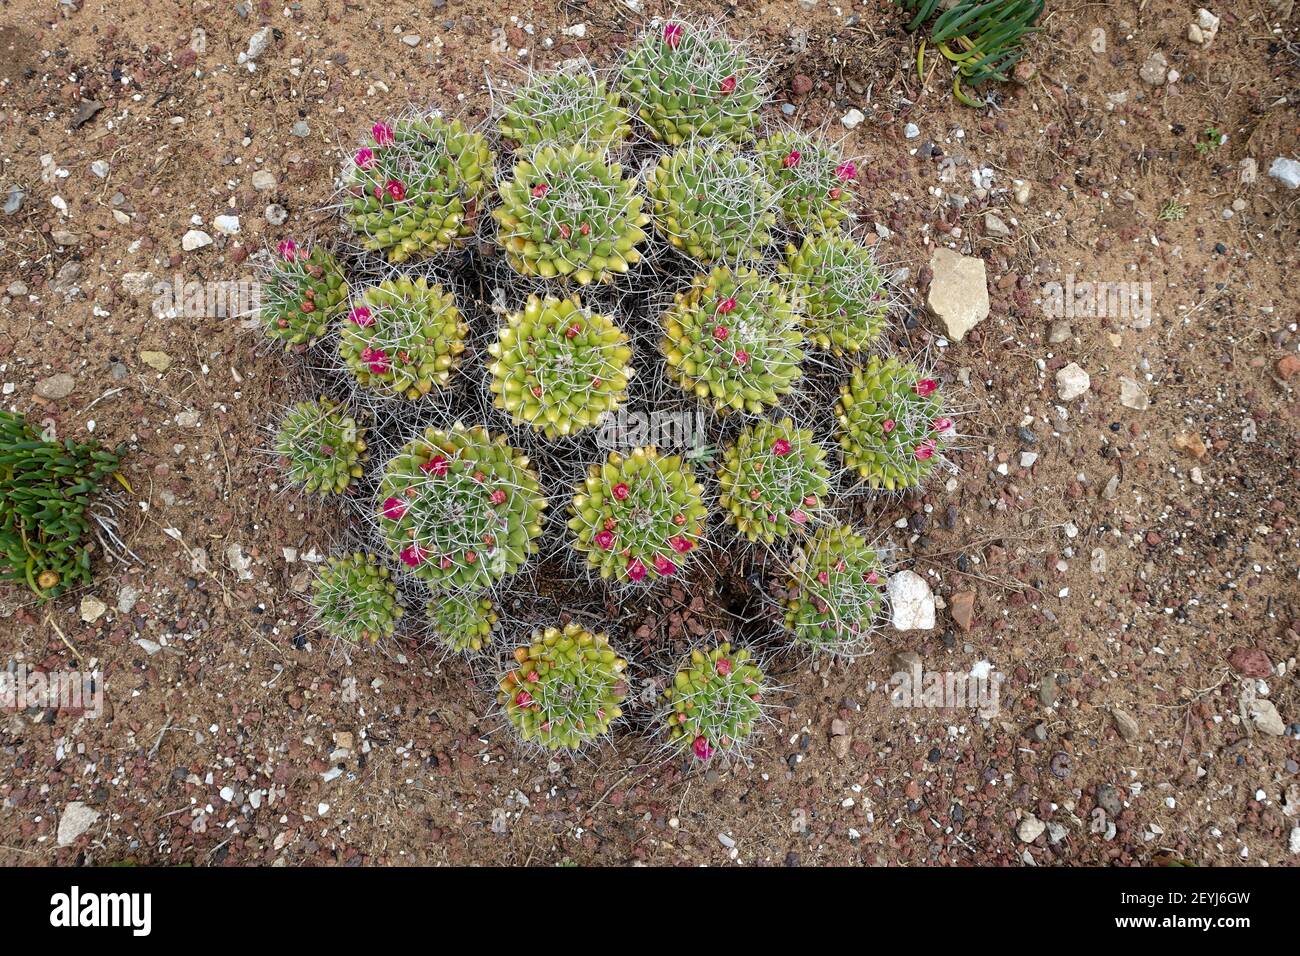 Clump of Mammillaria Sartorii cactii with pink flowers and a mediterranean garden Stock Photo